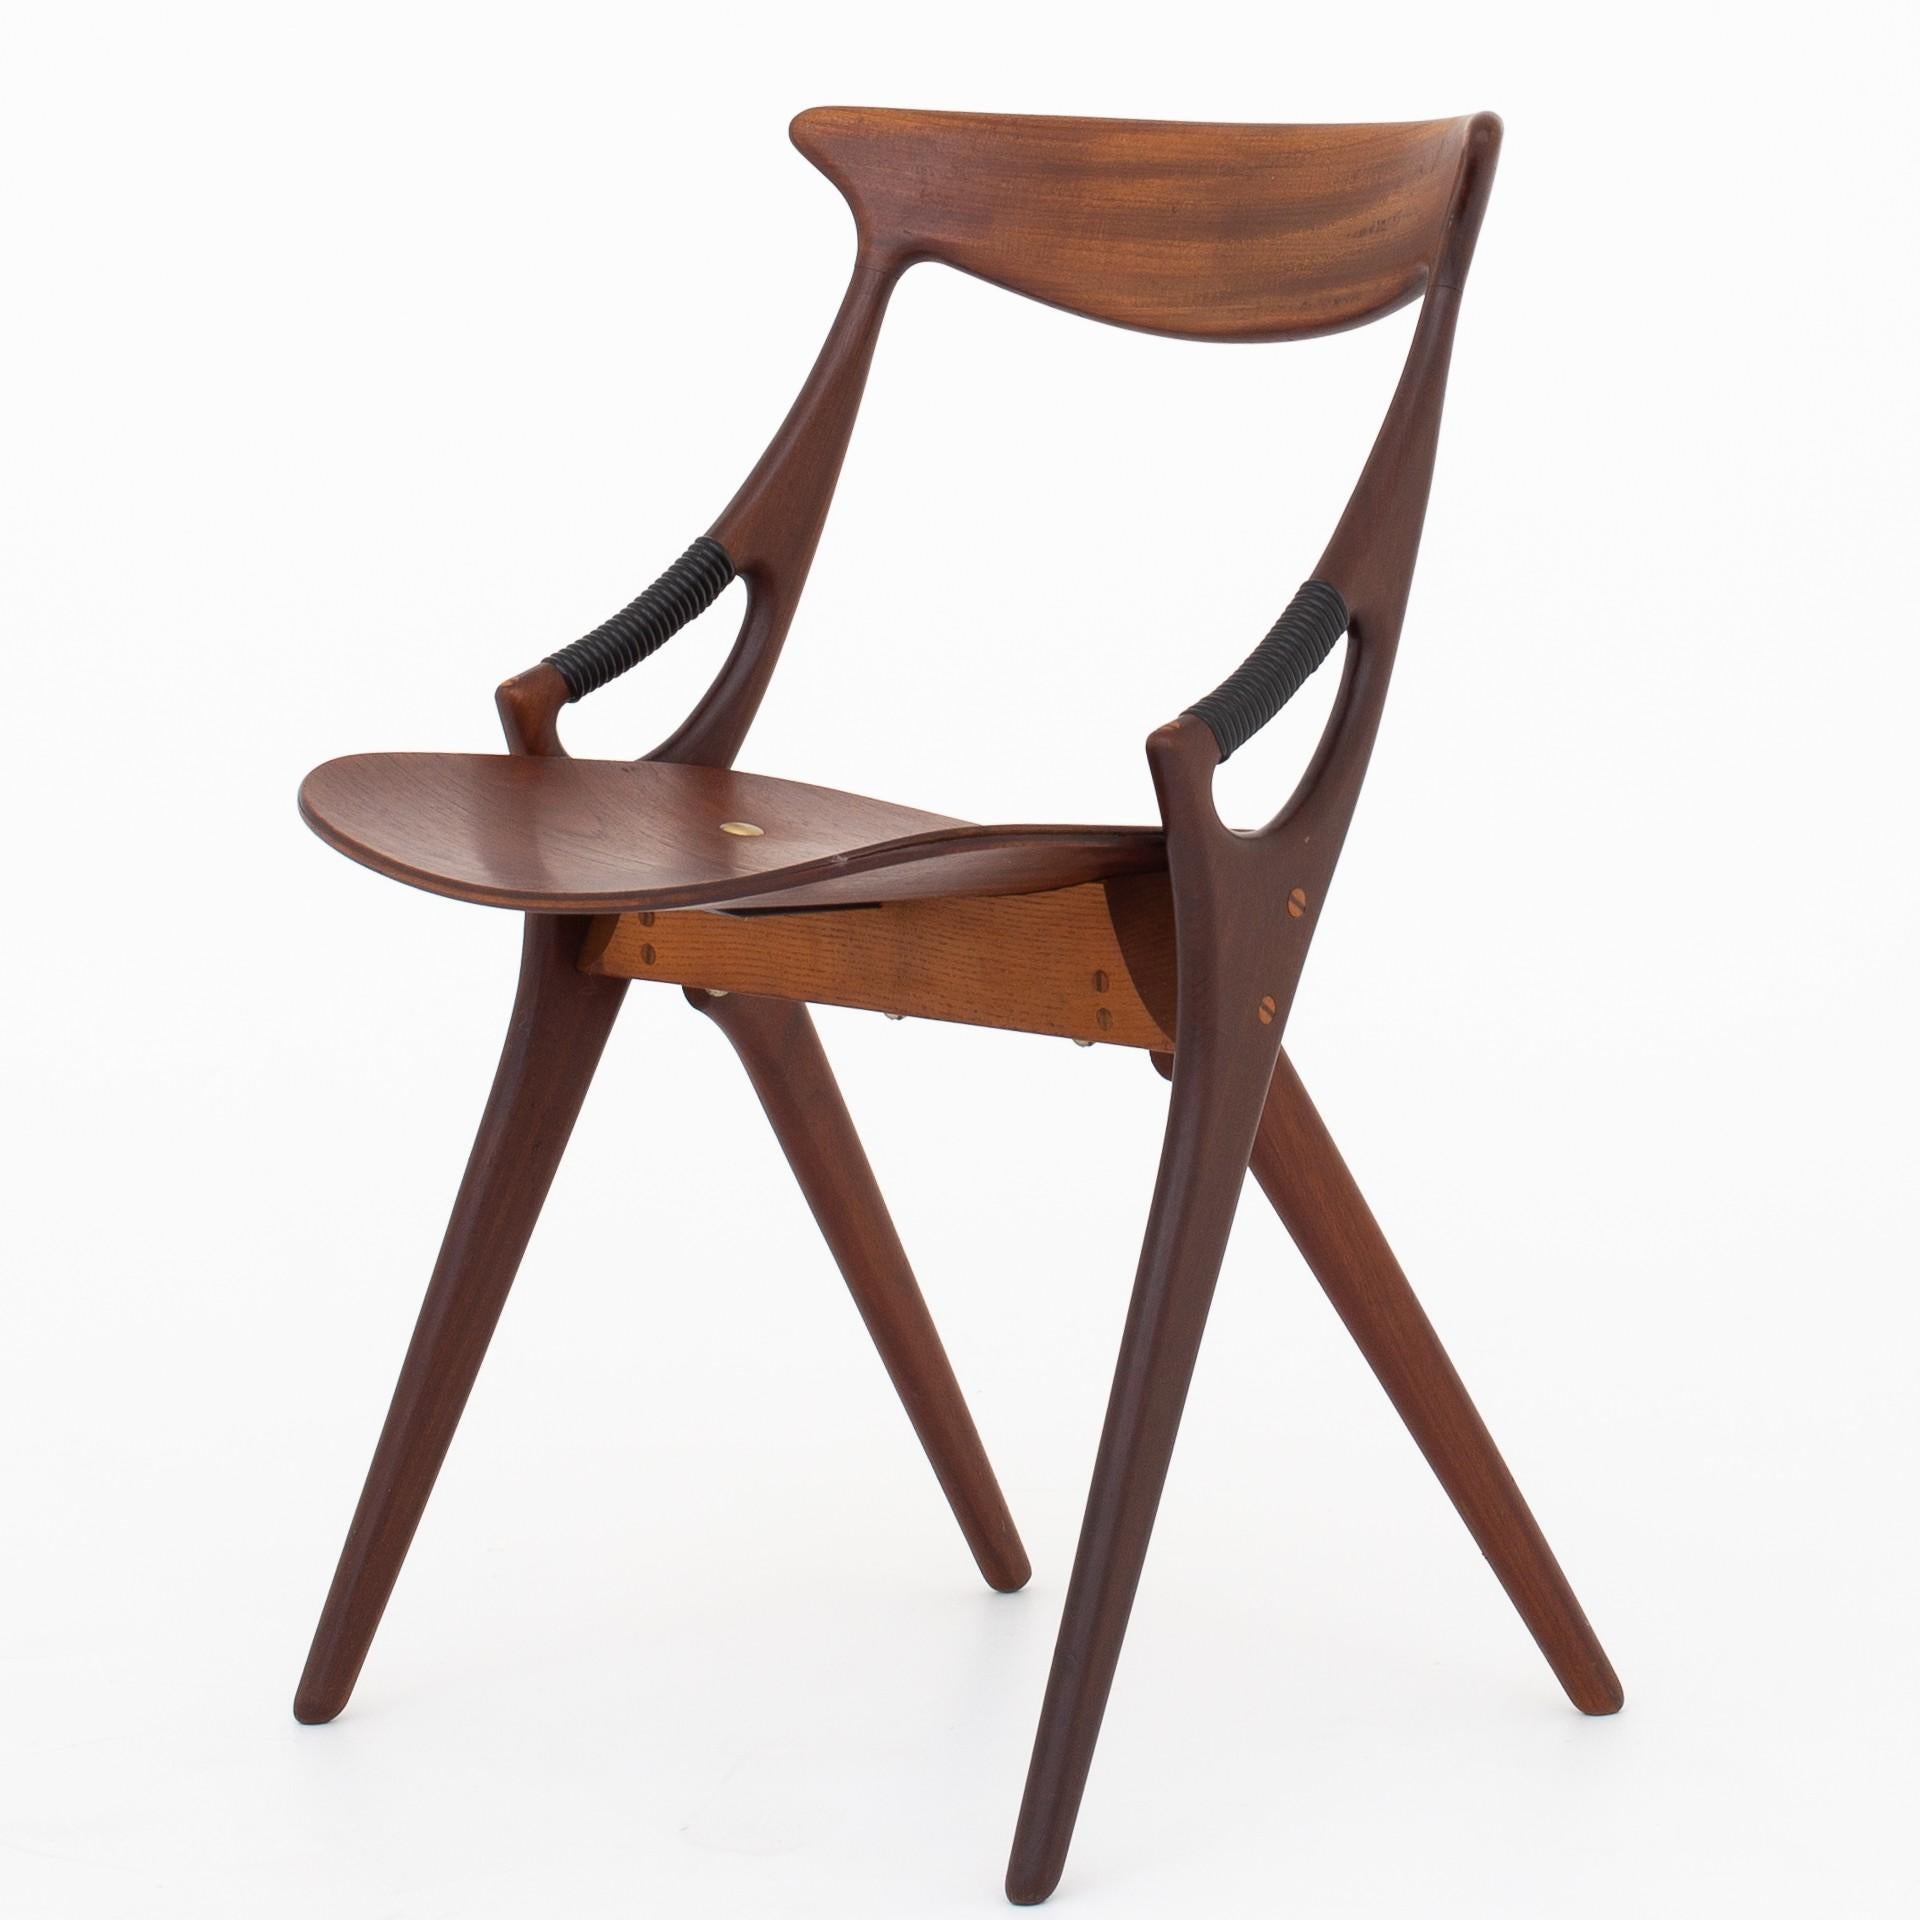 4 model 71, chairs in teak with wooden seat. Maker Mogens Kold.